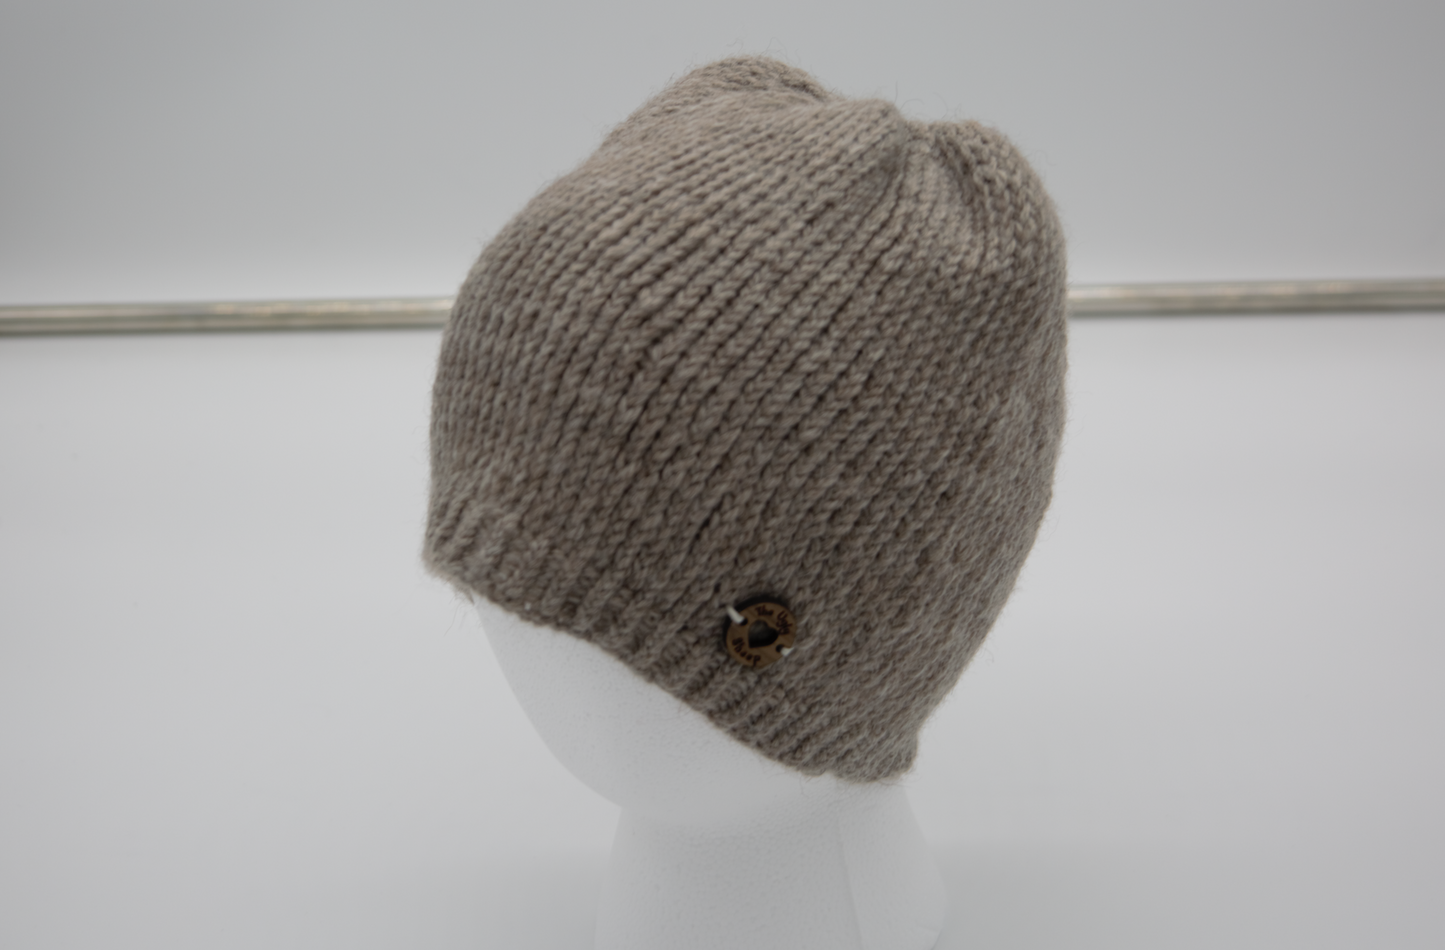 Basic Beanie Hand Knit Adult Alpaca Hat Made in the USA